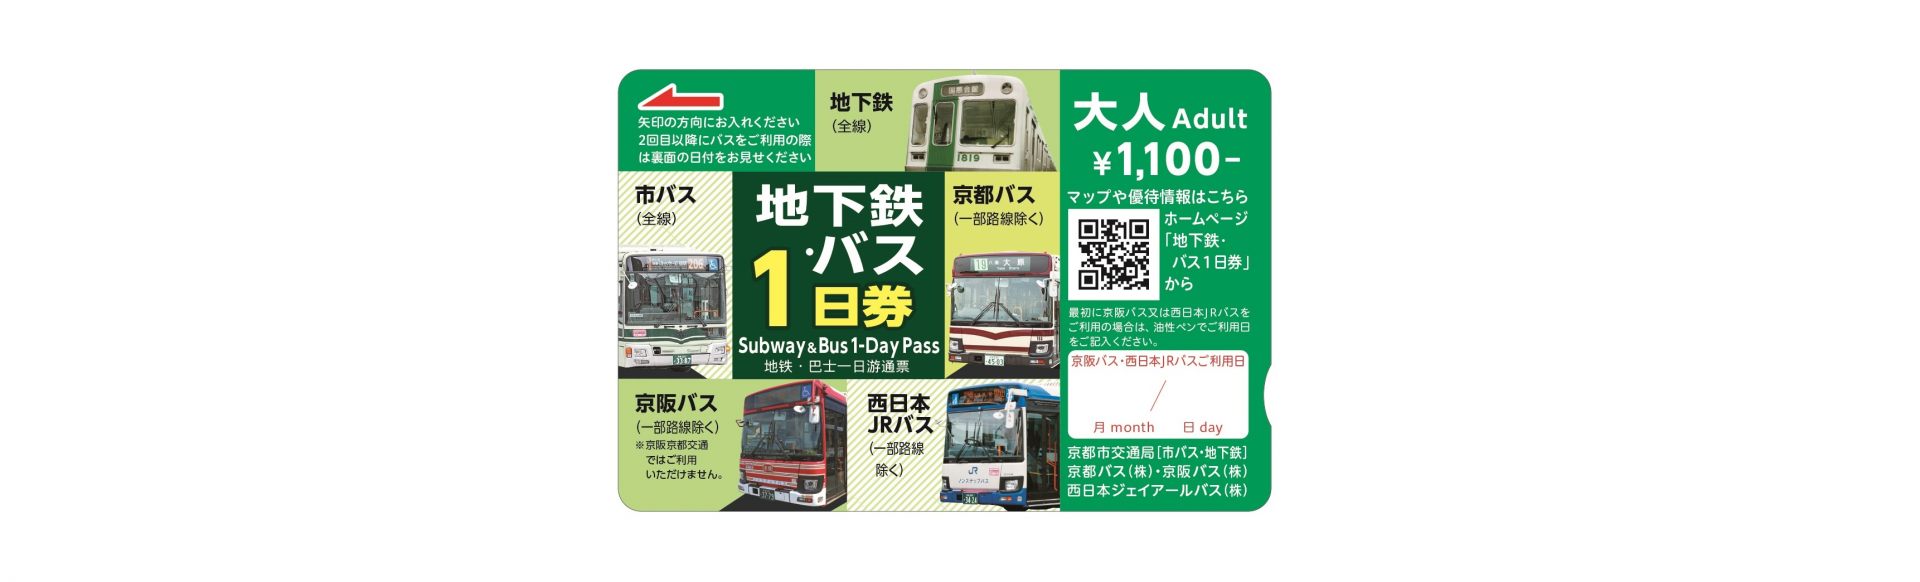 One-day Pass for Subways and Busses (Kyoto) | GOOD LUCK TRIP